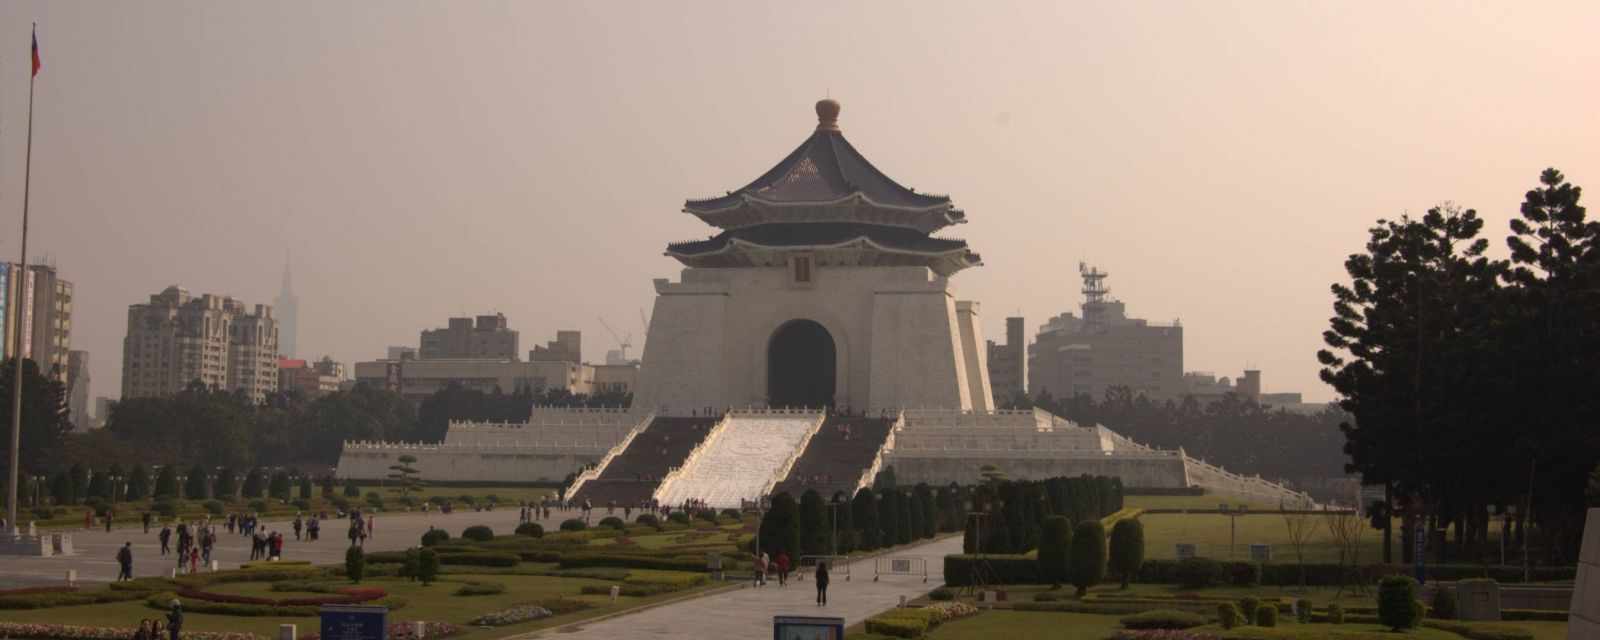 Chiang Kai-shek Memorial Hall - Everything You Need to Know